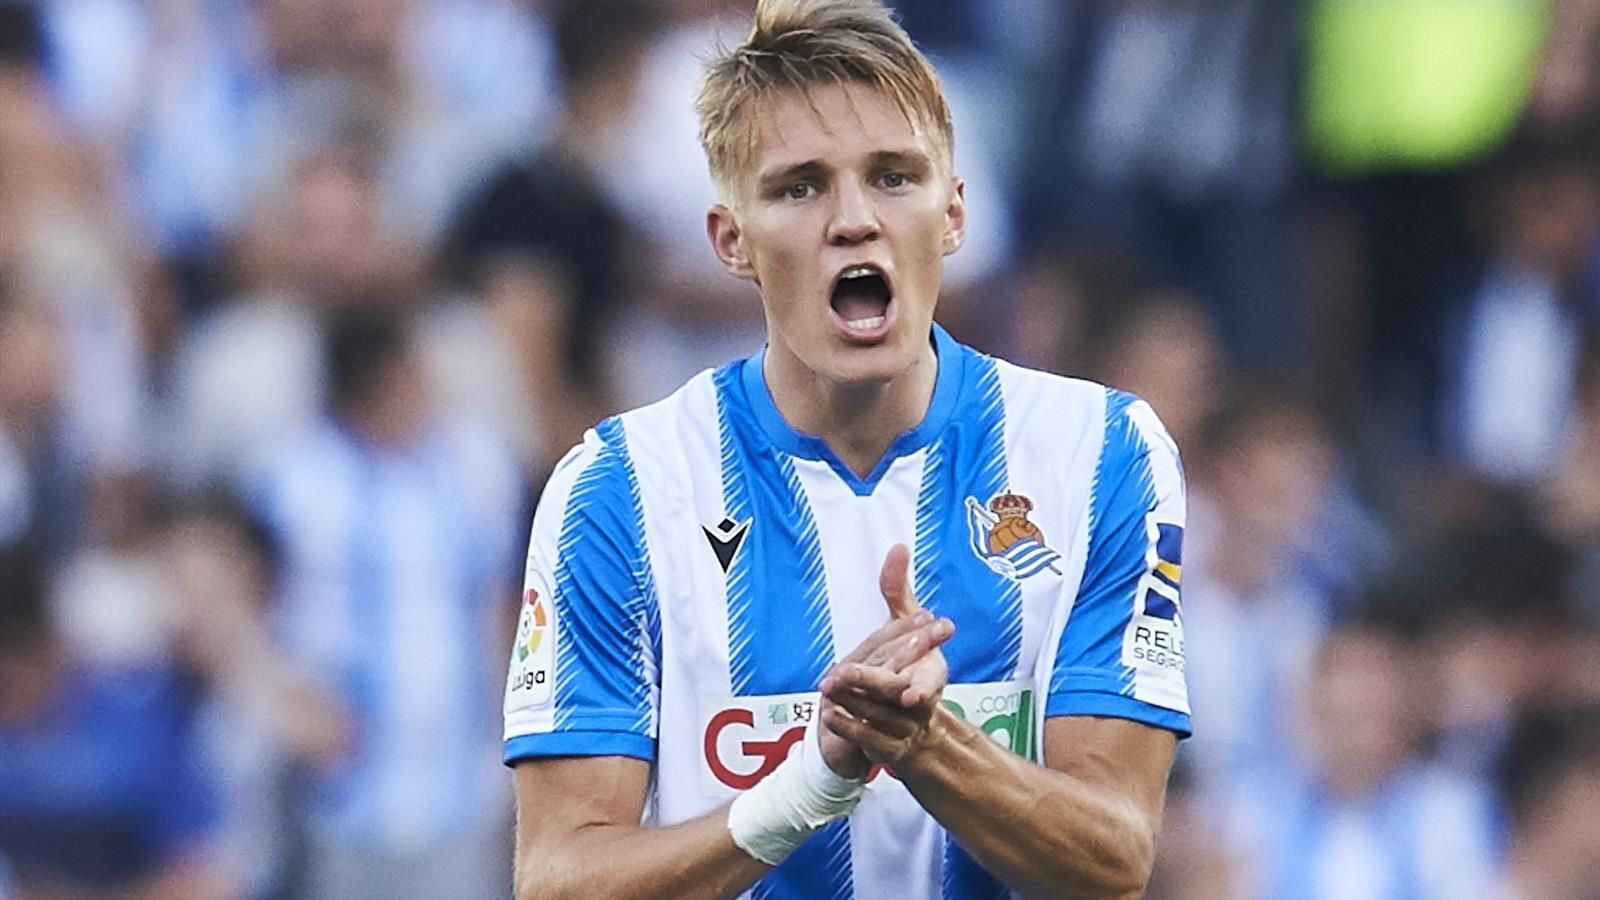 Odegaard to Remain at Real Sociedad, confirms Club President